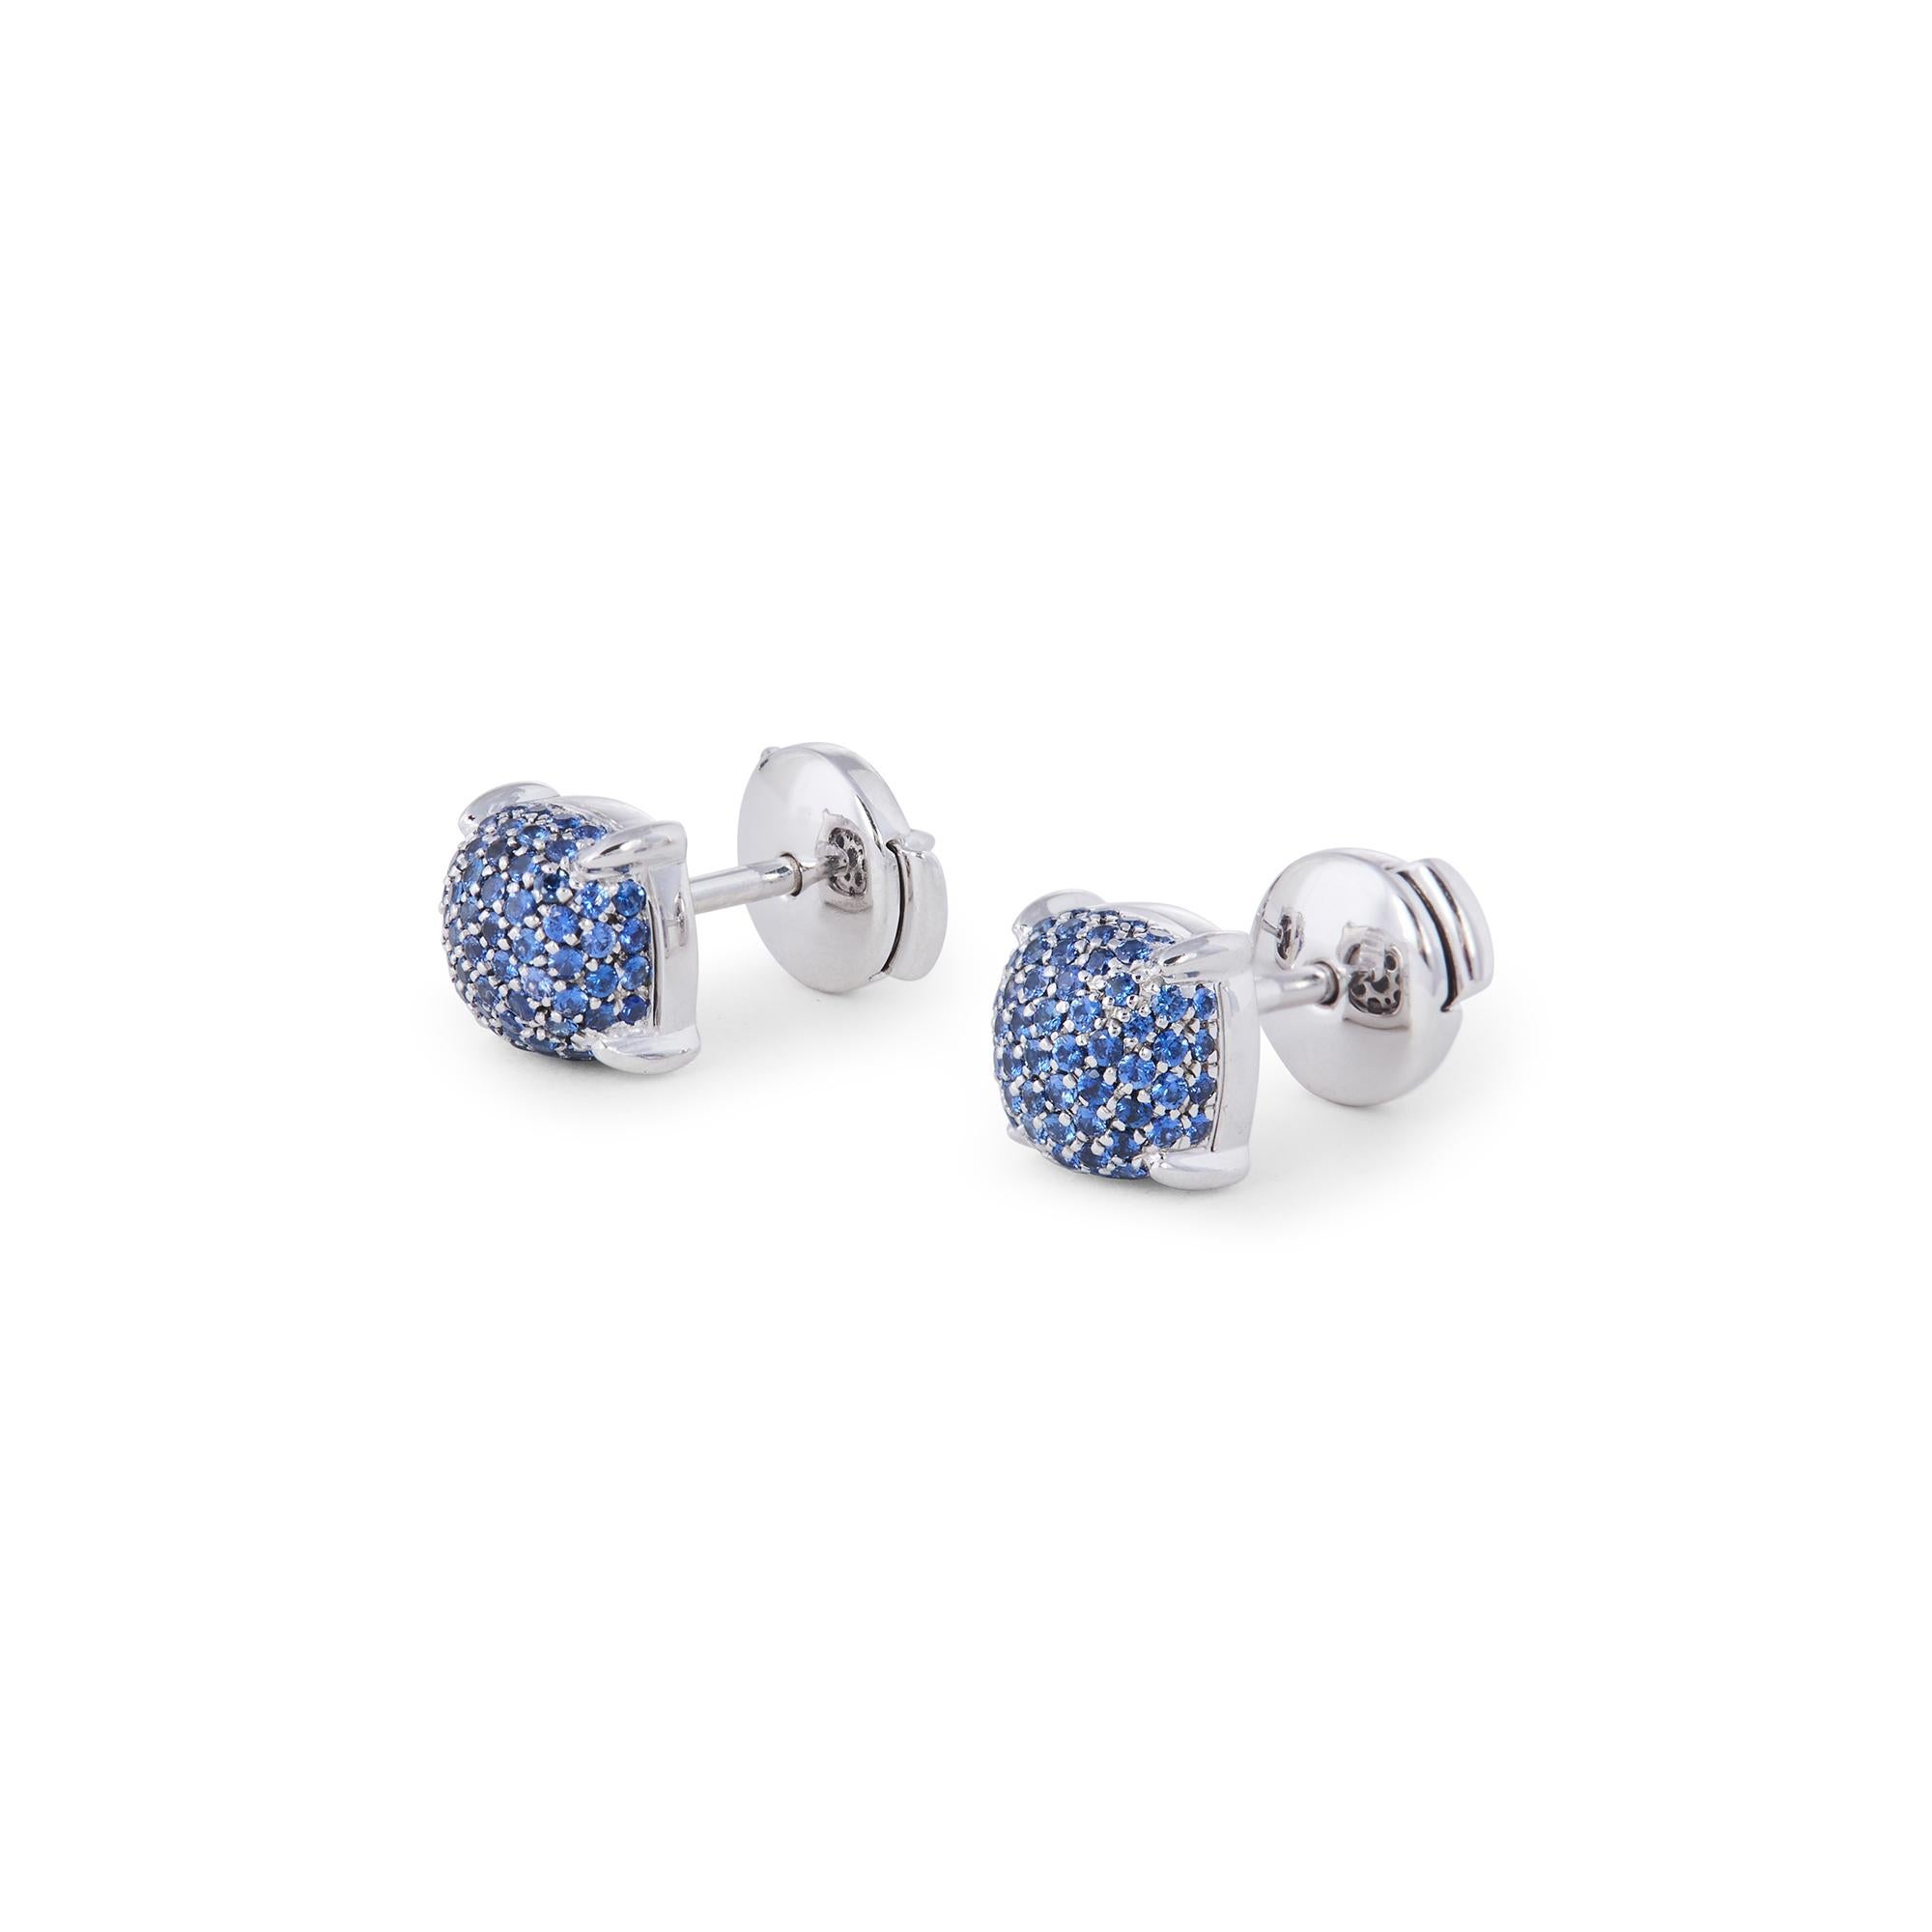 Authentic Palmoa Picasso for Tiffany & Co. Sugar Stacks earrings crafted in 18 karat white gold.  Each domed stud earring is pave set blue sapphires for approximately 0.58 carats total weight.  The earrings measure 0.03 inches x 0.30 inches.  Signed